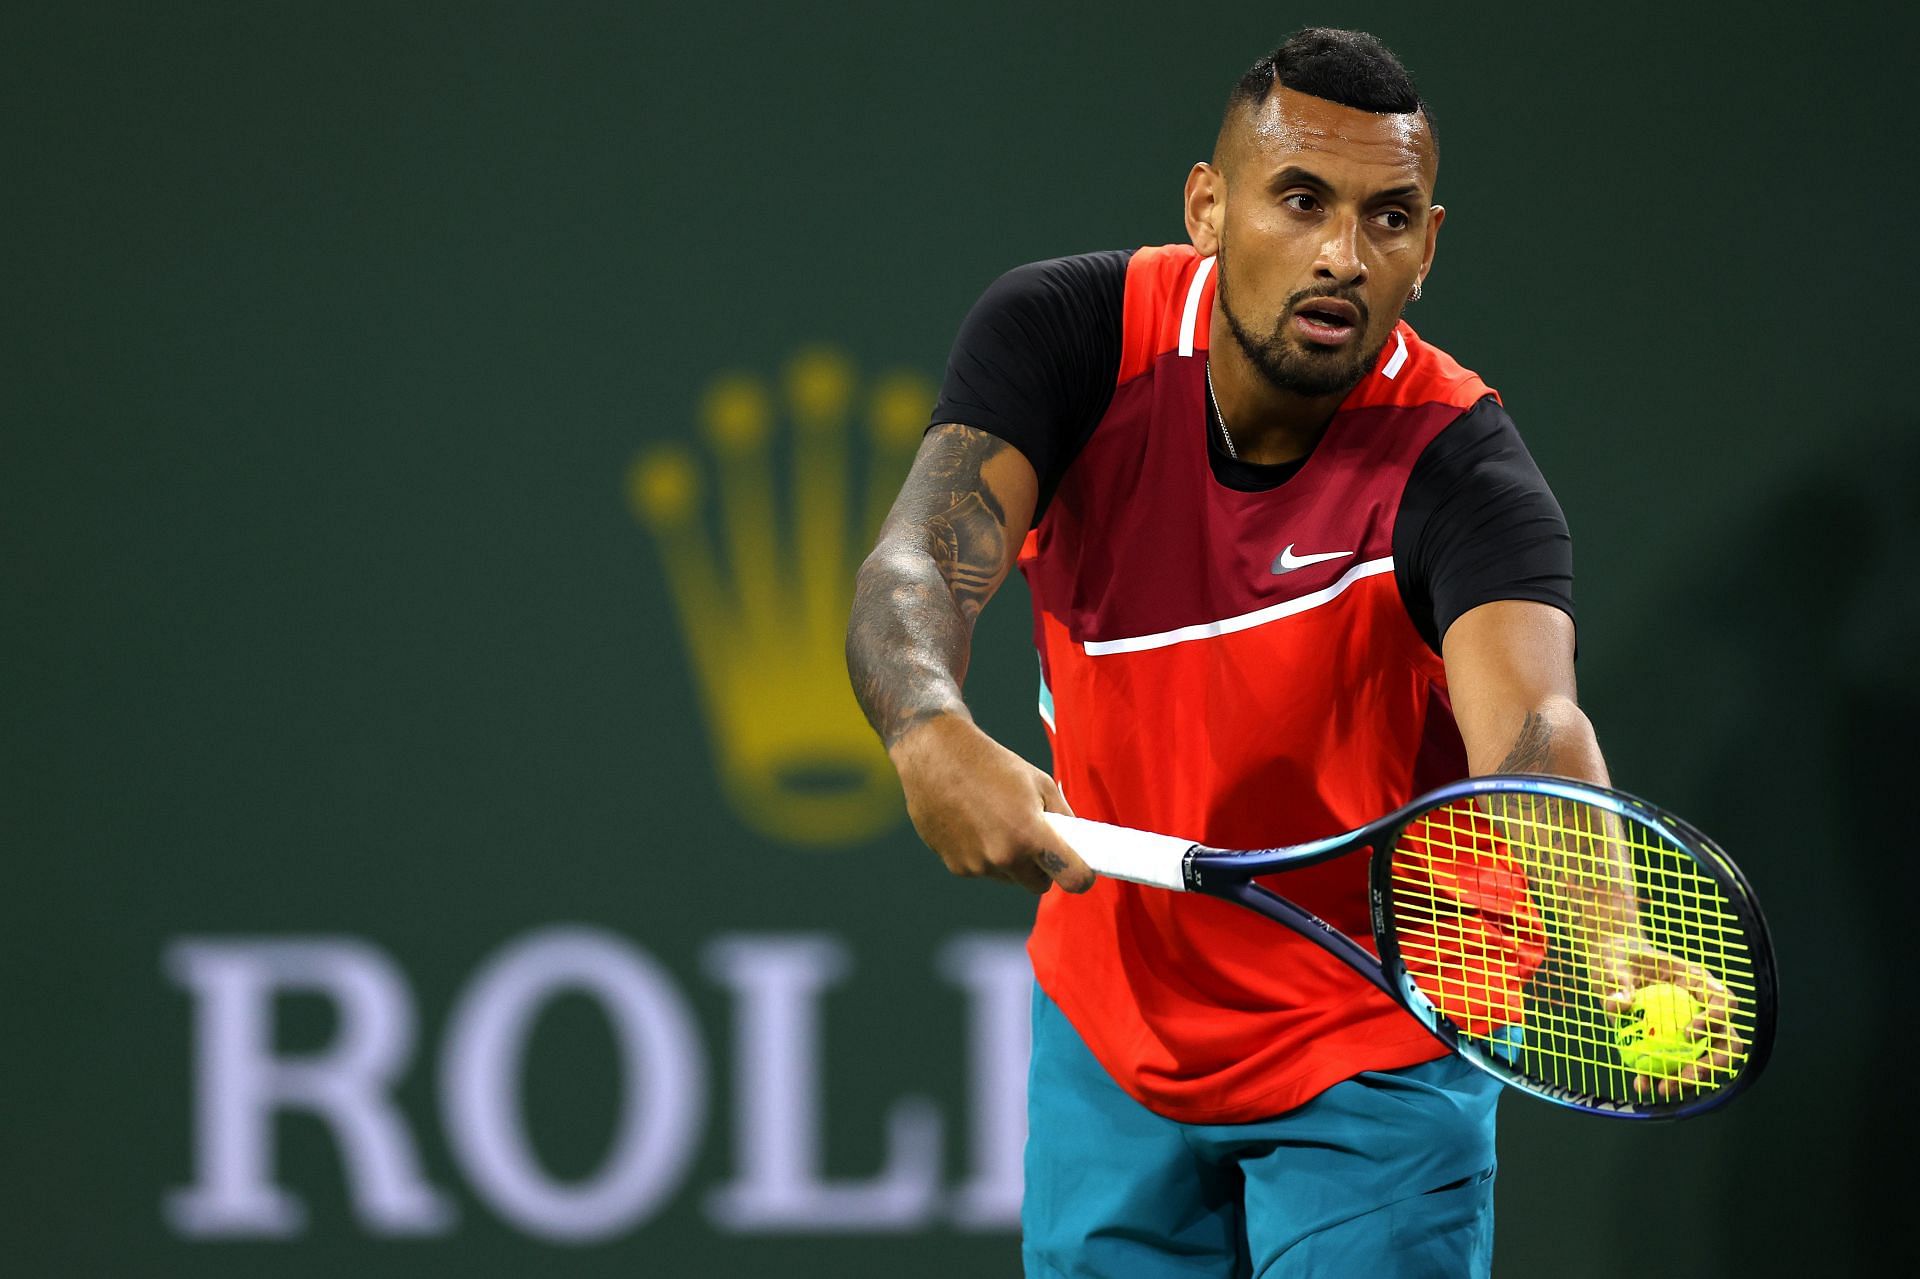 Kyrgios has served up 442 aces in just 28 matches this year